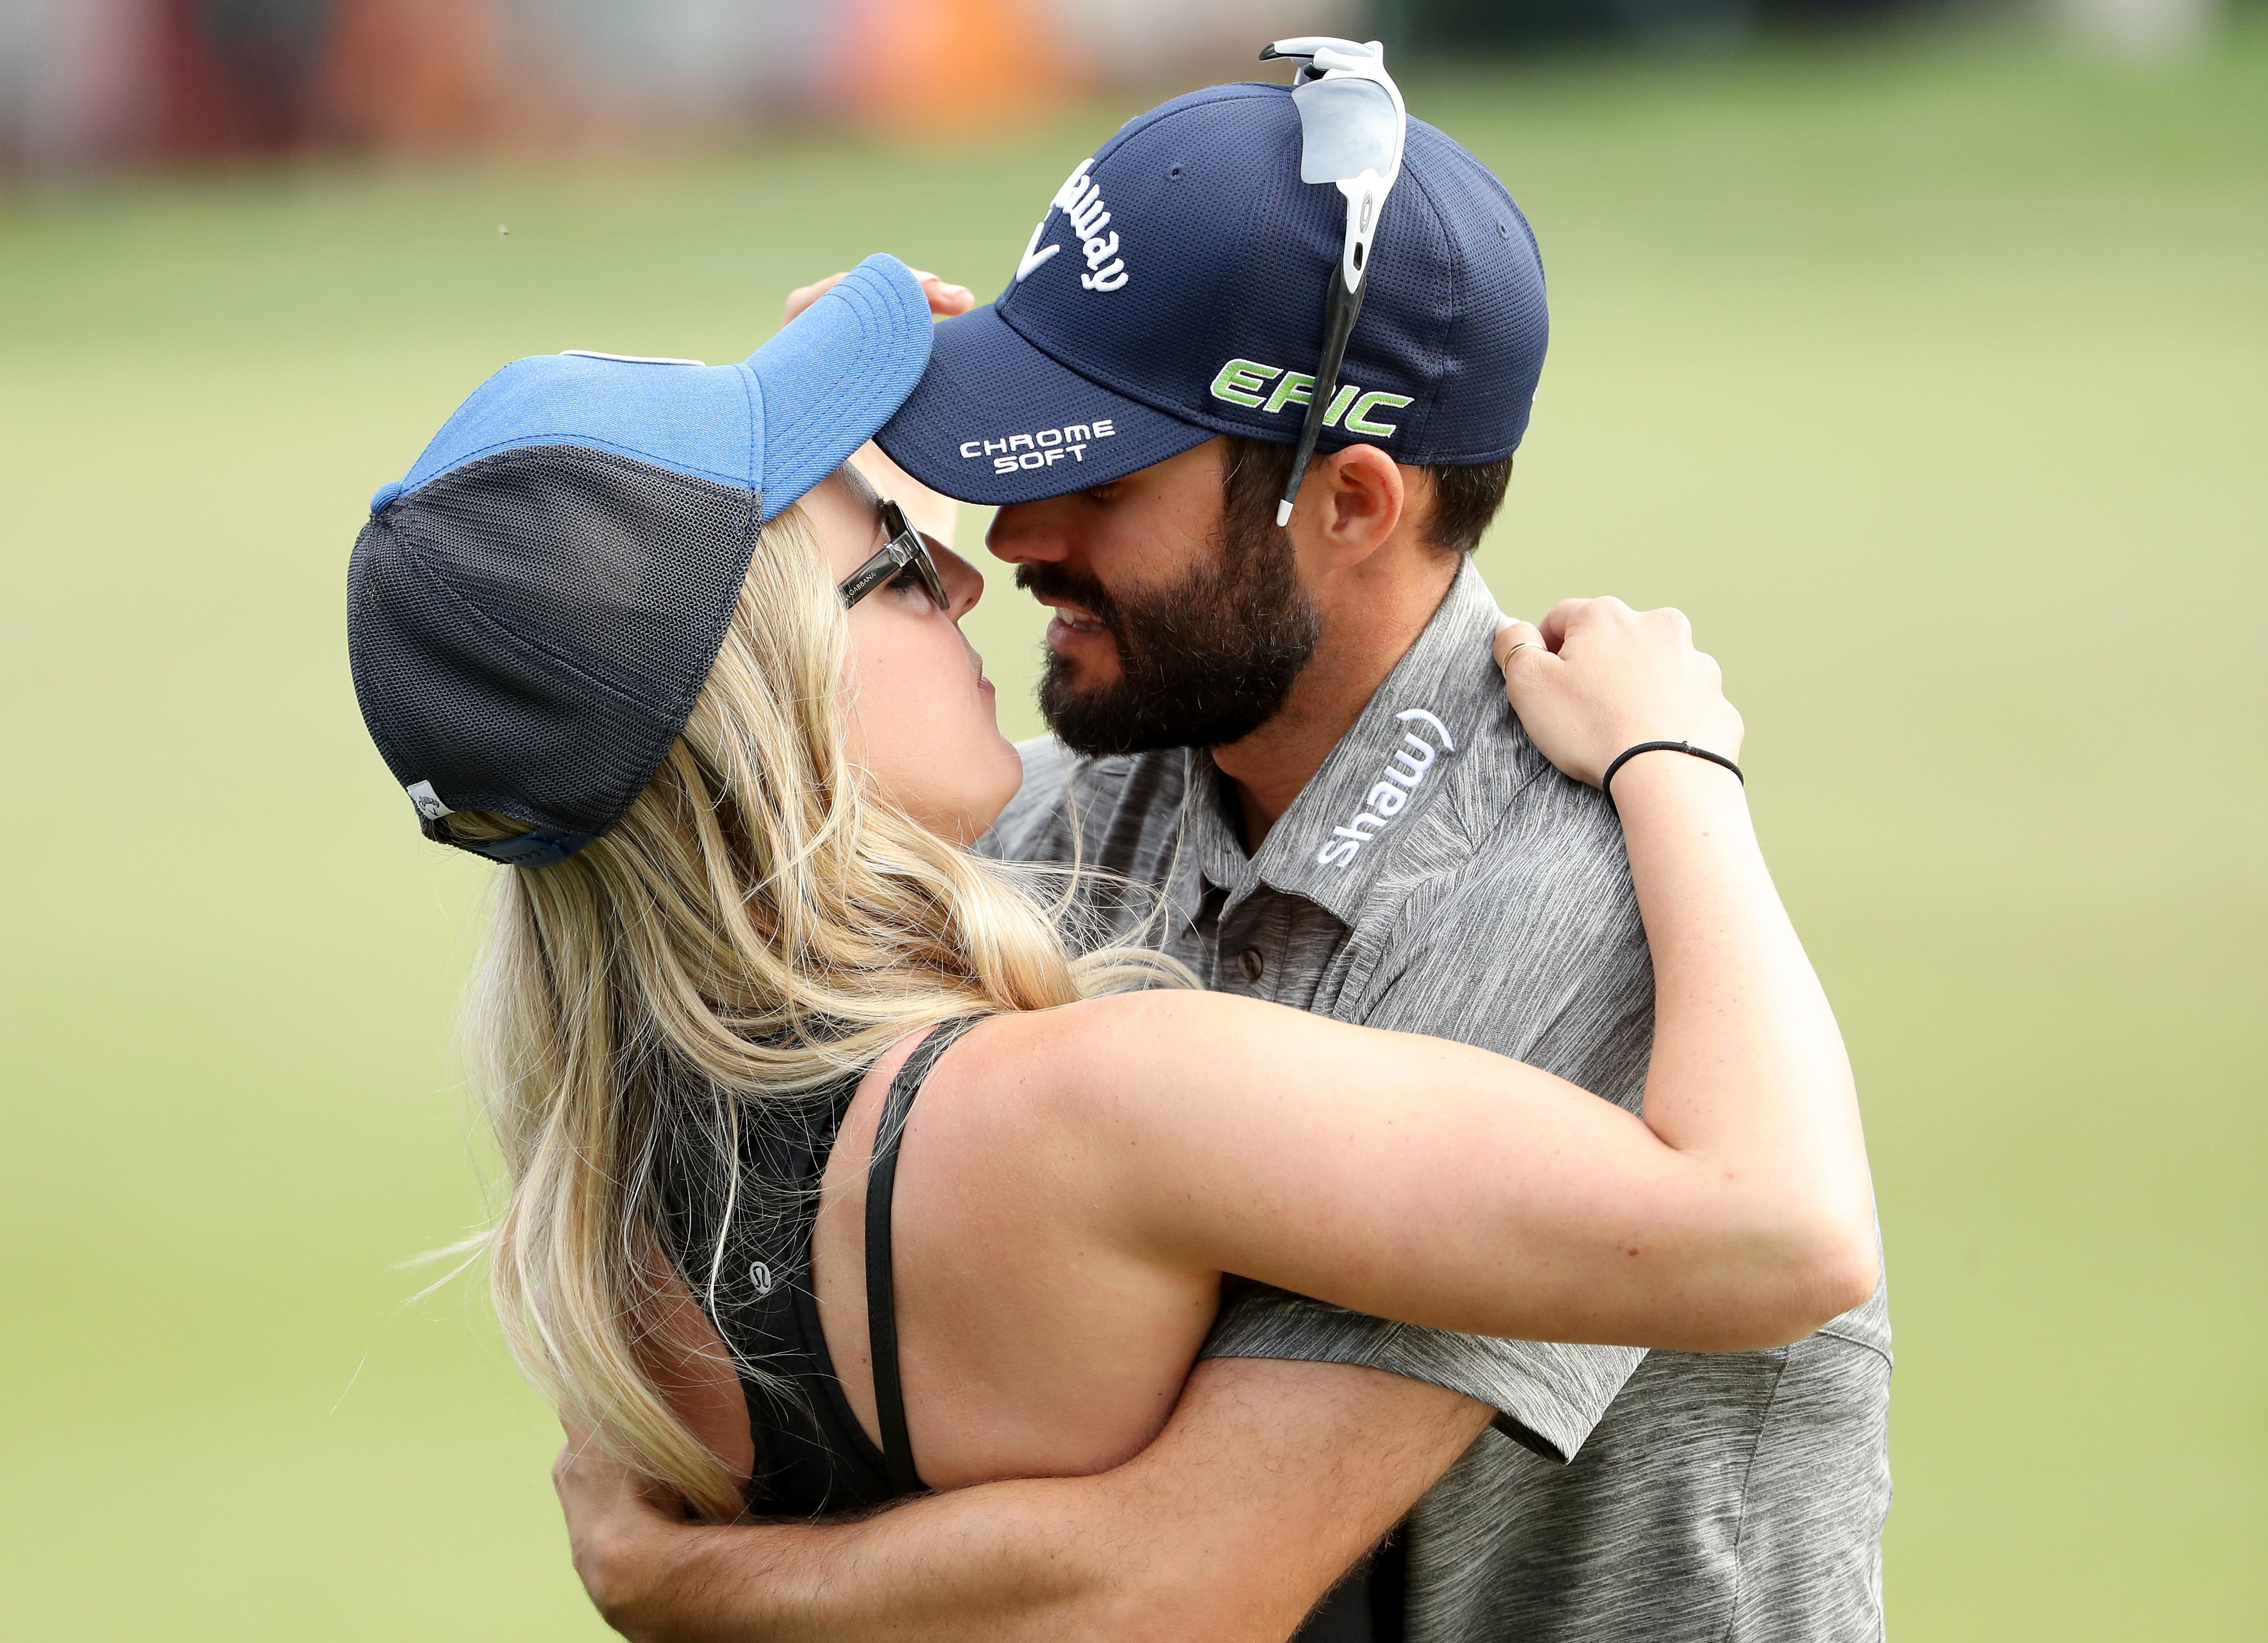 Another PGA Tour pro is deep in the doghouse after commenting on his wifes outfit This is the Loop GolfDigest image pic